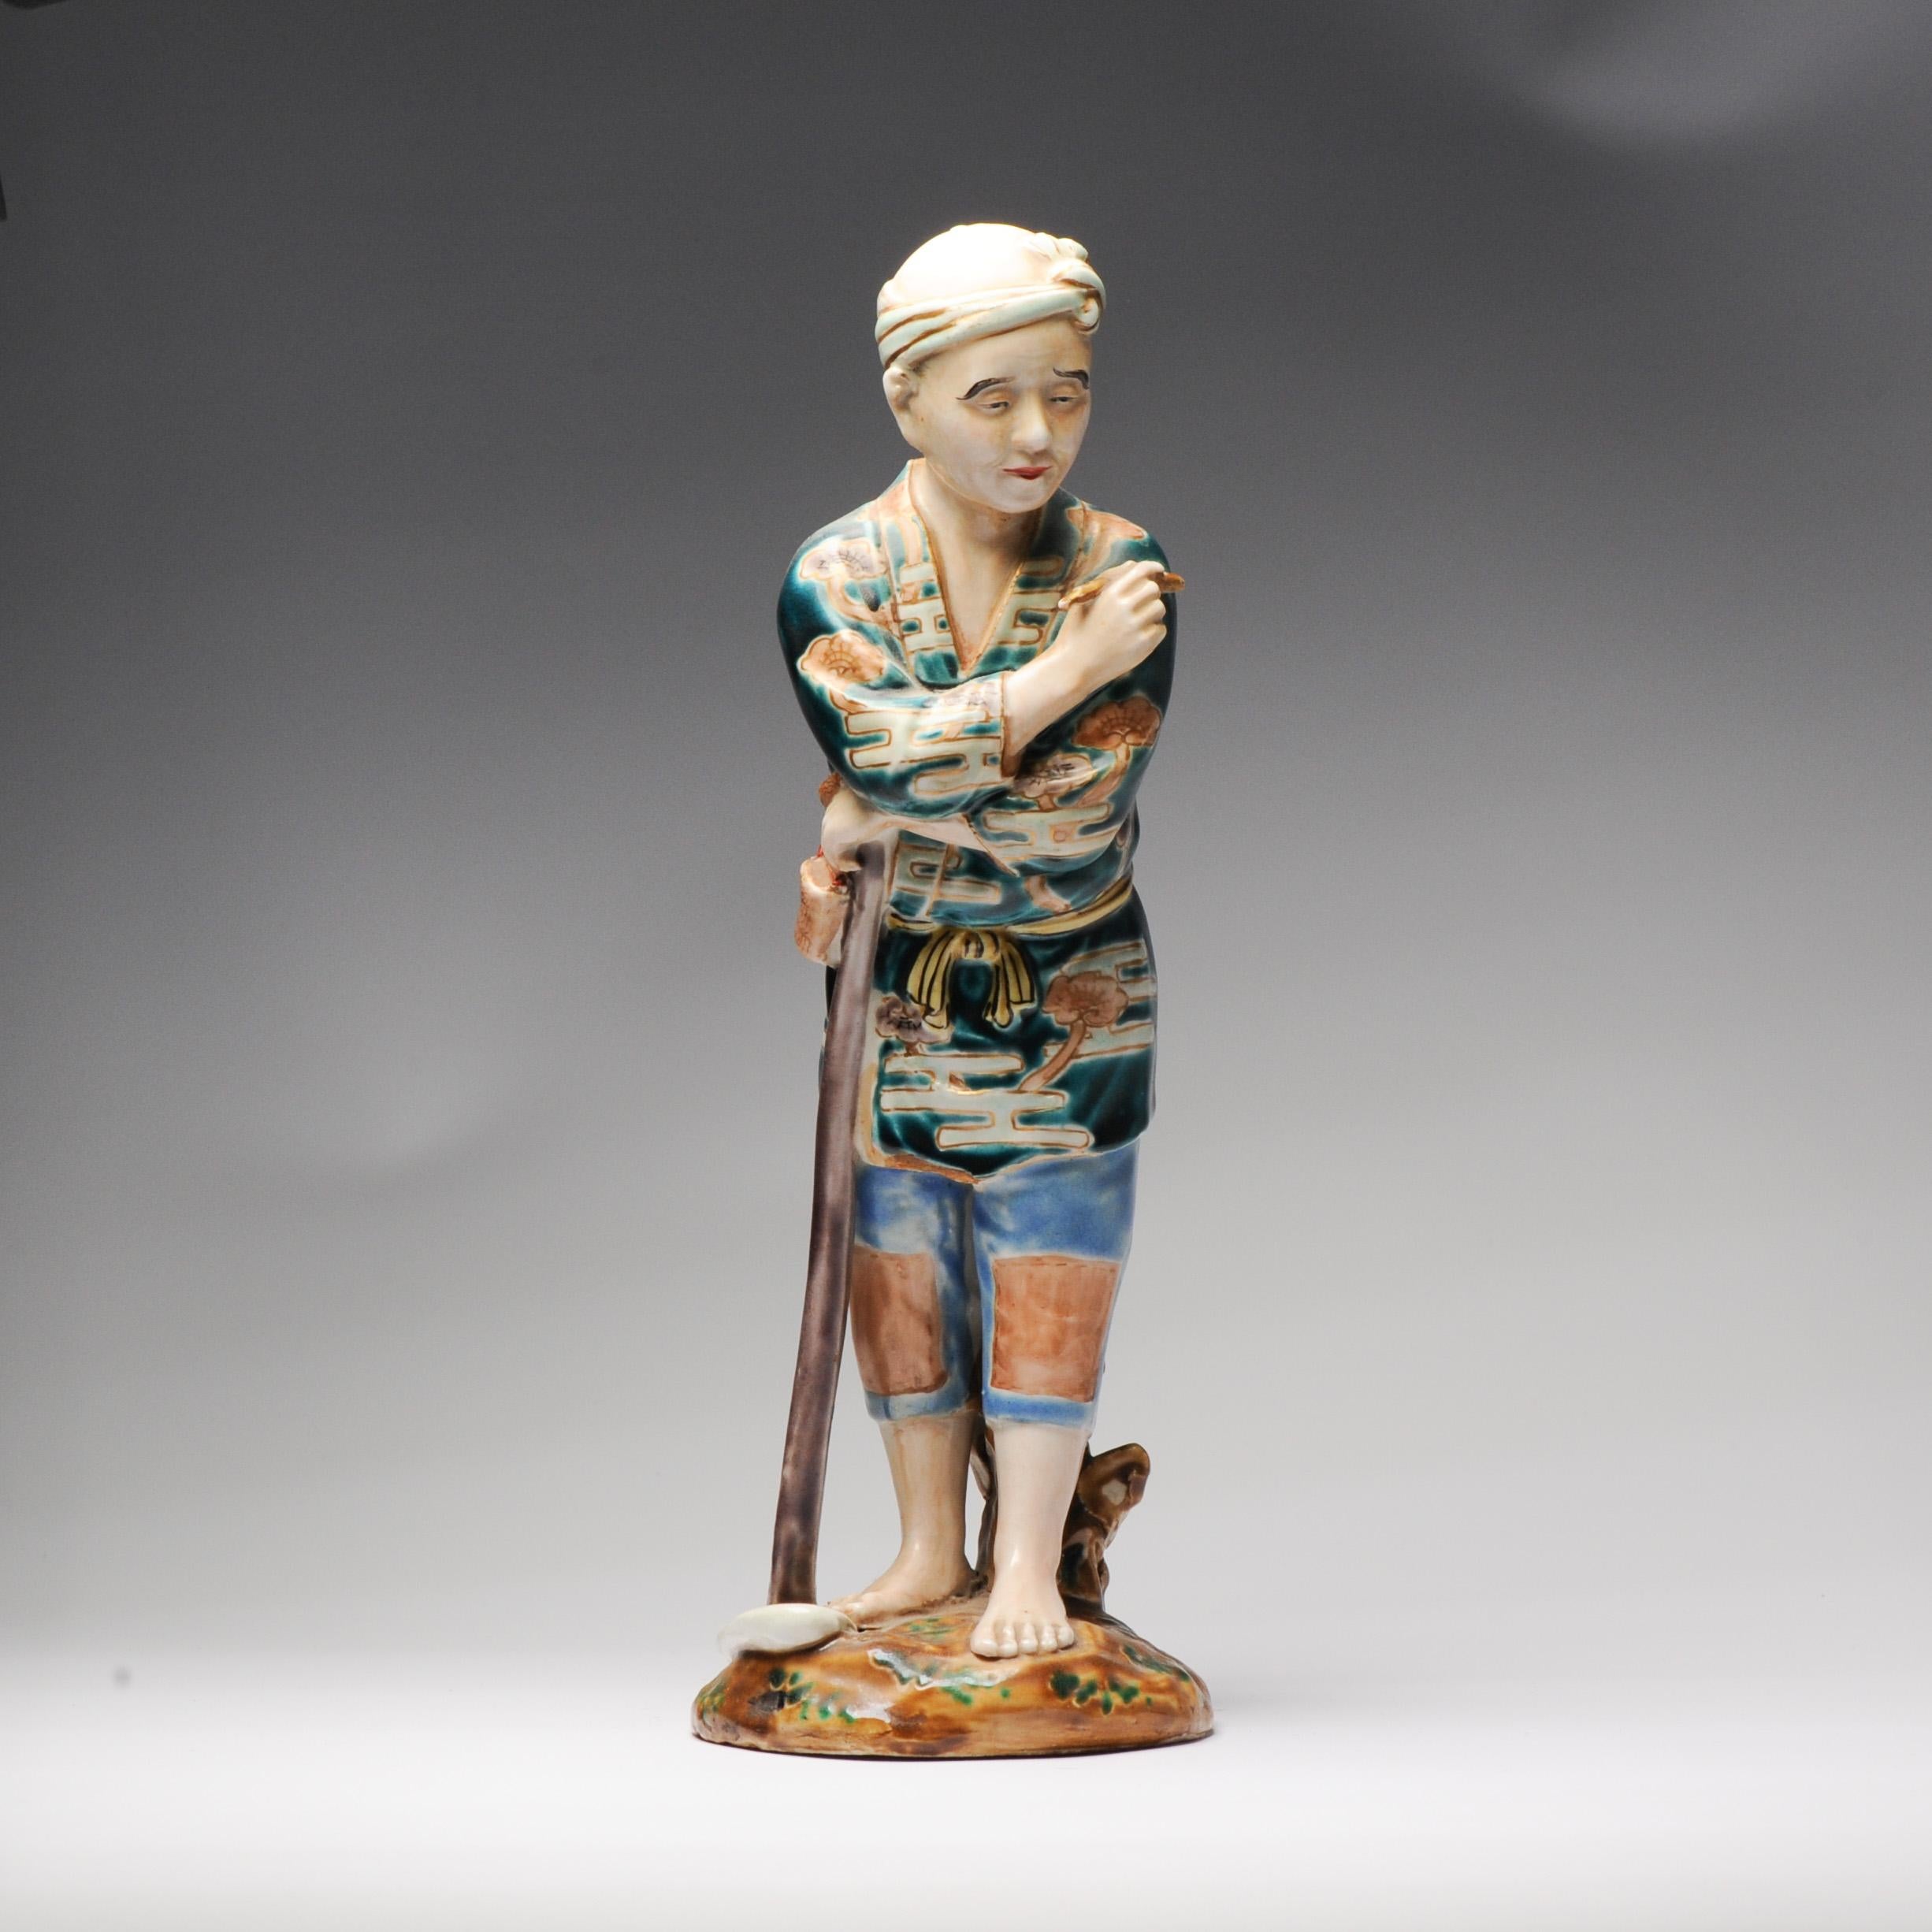 Description

A Japanese Kutani statue, Meiji period

Unmarked

Condition
Overall Condition small piece missing of the artifact held by the figure. Size 280mm high

Period
Meiji Periode (1867-1912).